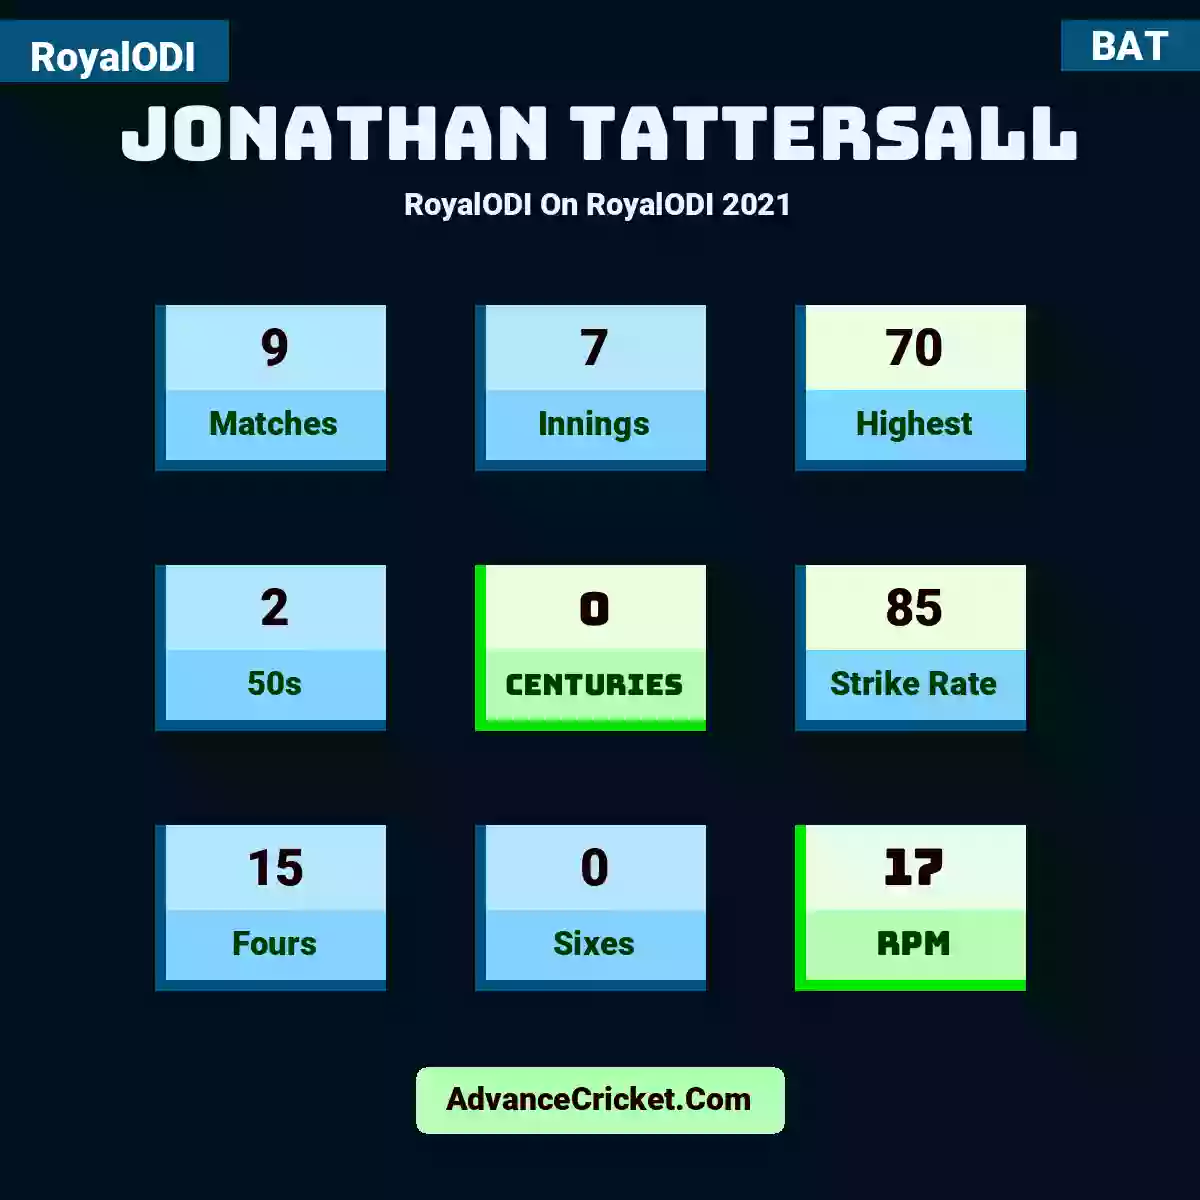 Jonathan Tattersall RoyalODI  On RoyalODI 2021, Jonathan Tattersall played 9 matches, scored 70 runs as highest, 2 half-centuries, and 0 centuries, with a strike rate of 85. J.Tattersall hit 15 fours and 0 sixes, with an RPM of 17.